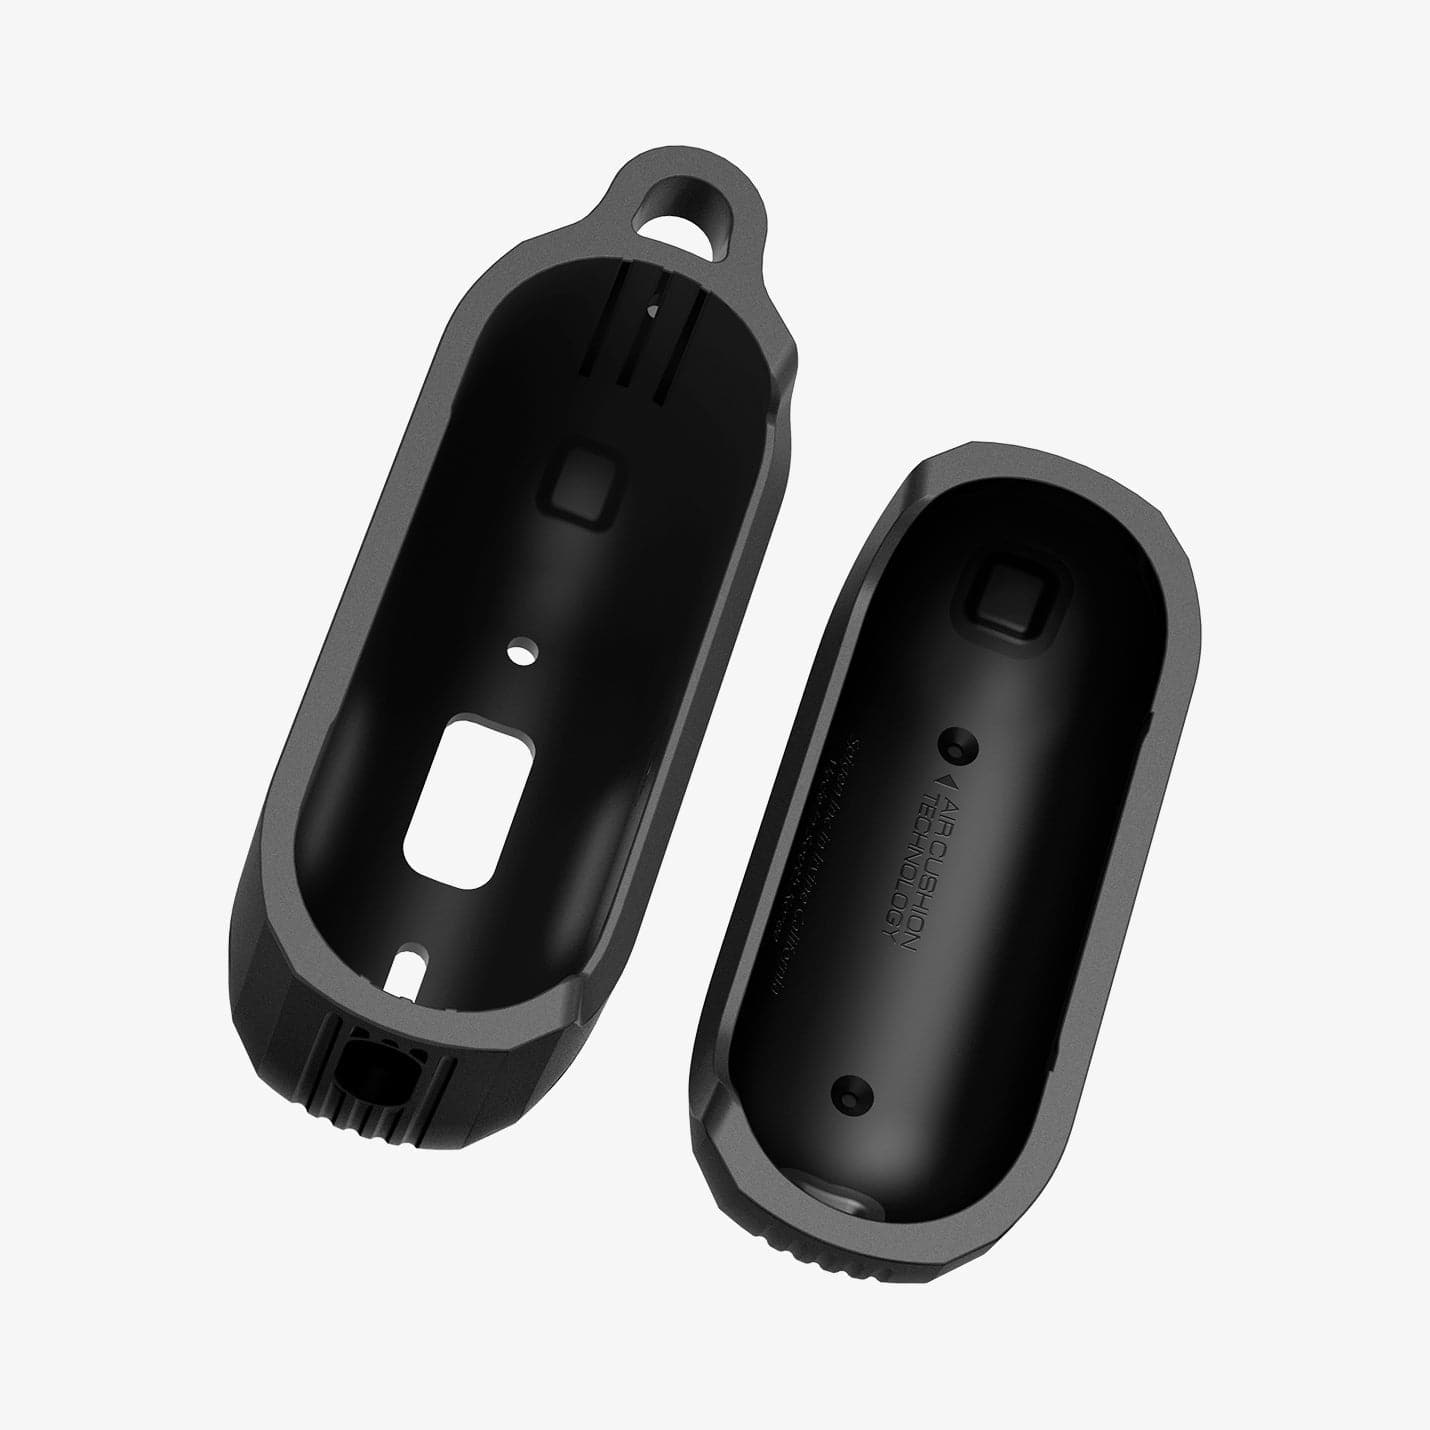 Spigen Rugged Armor Designed for Airpods Pro Case Cover Protective with  Keychain - Matte Black